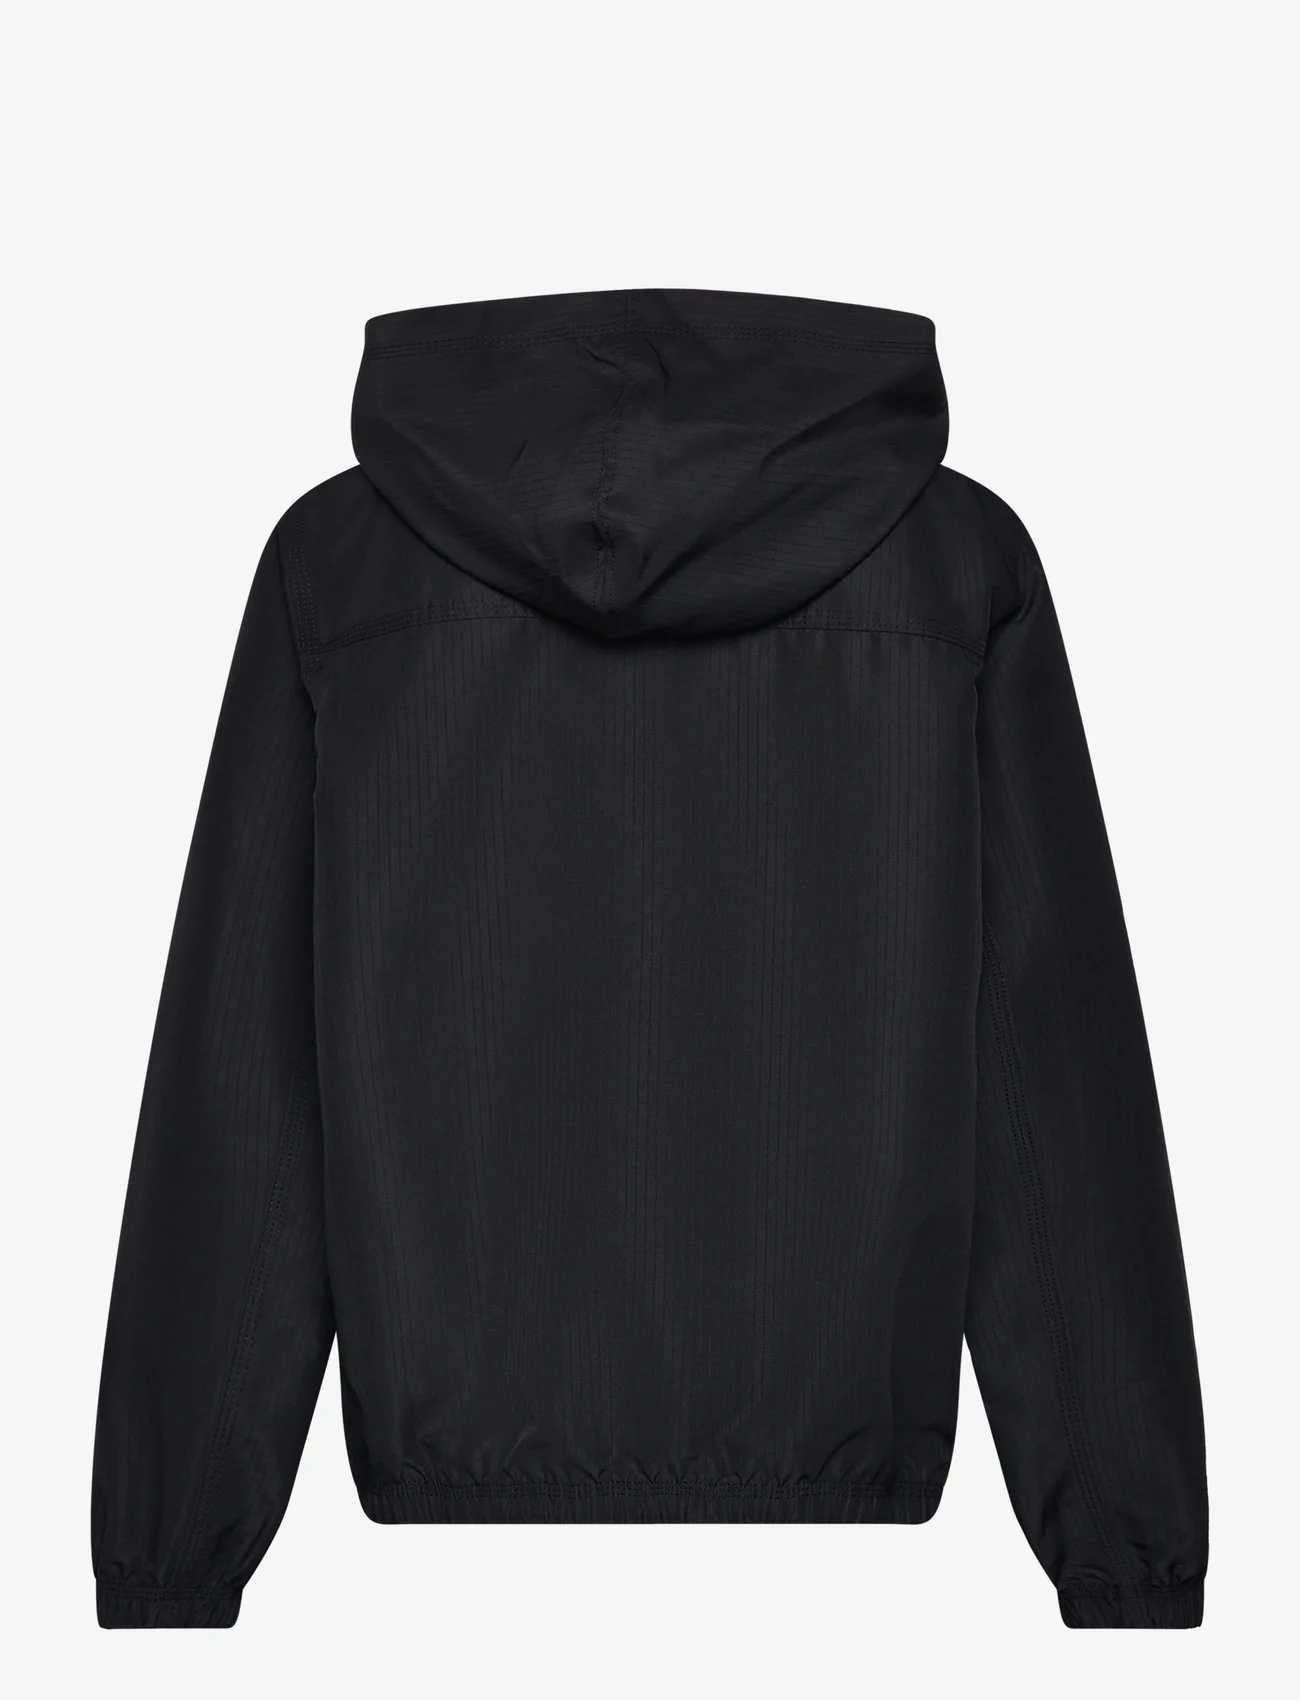 Converse - GEARED UP LAYERING PO / GEARED UP LAYERING PO - hupparit - black - 1